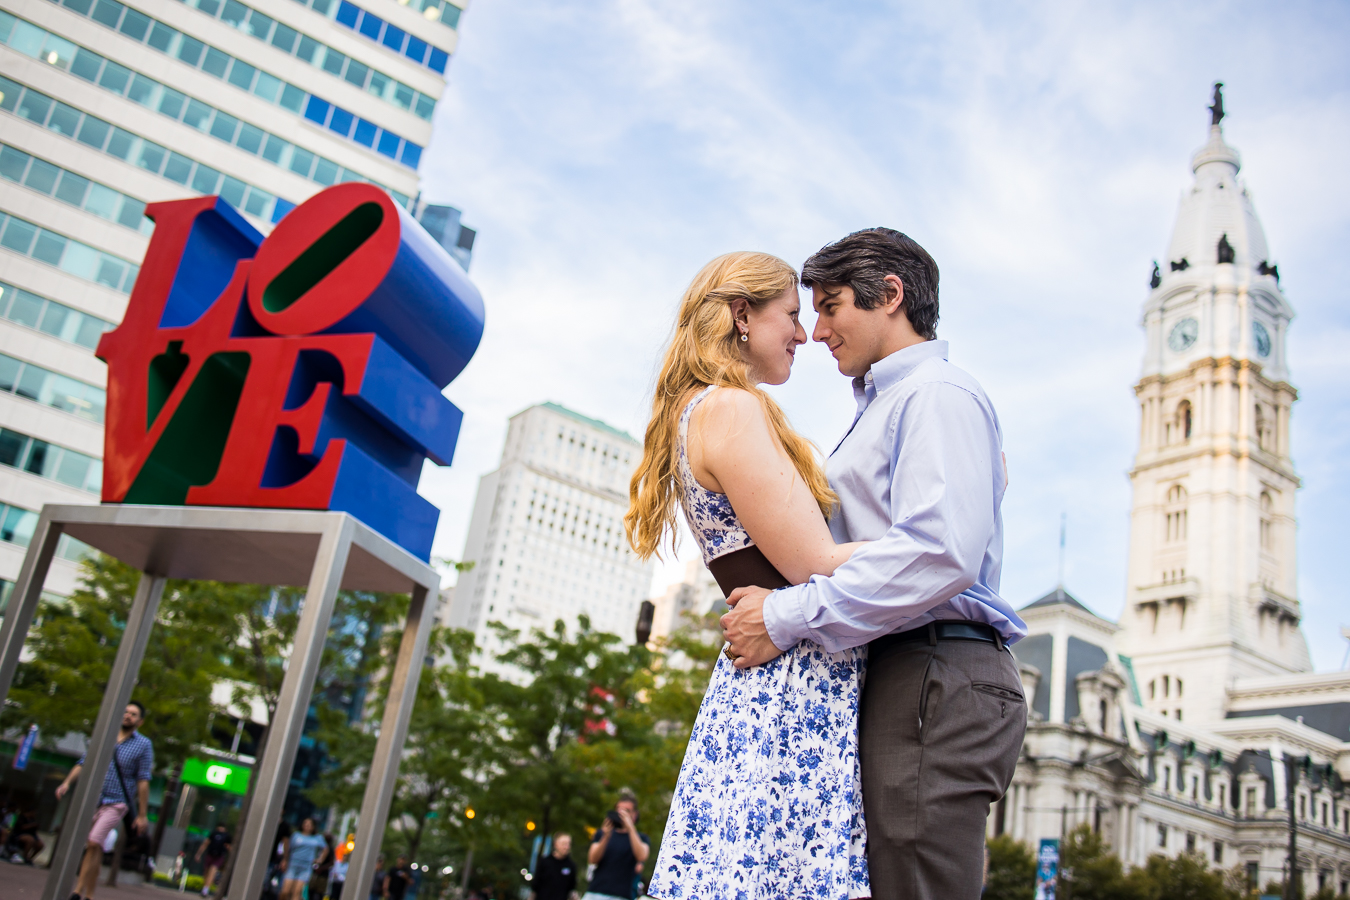 creative, unique image of the couple as they standing face one another hugging and smiling with the giant love sign and other Philadelphia landmarks behind them for this creative philly engagement 